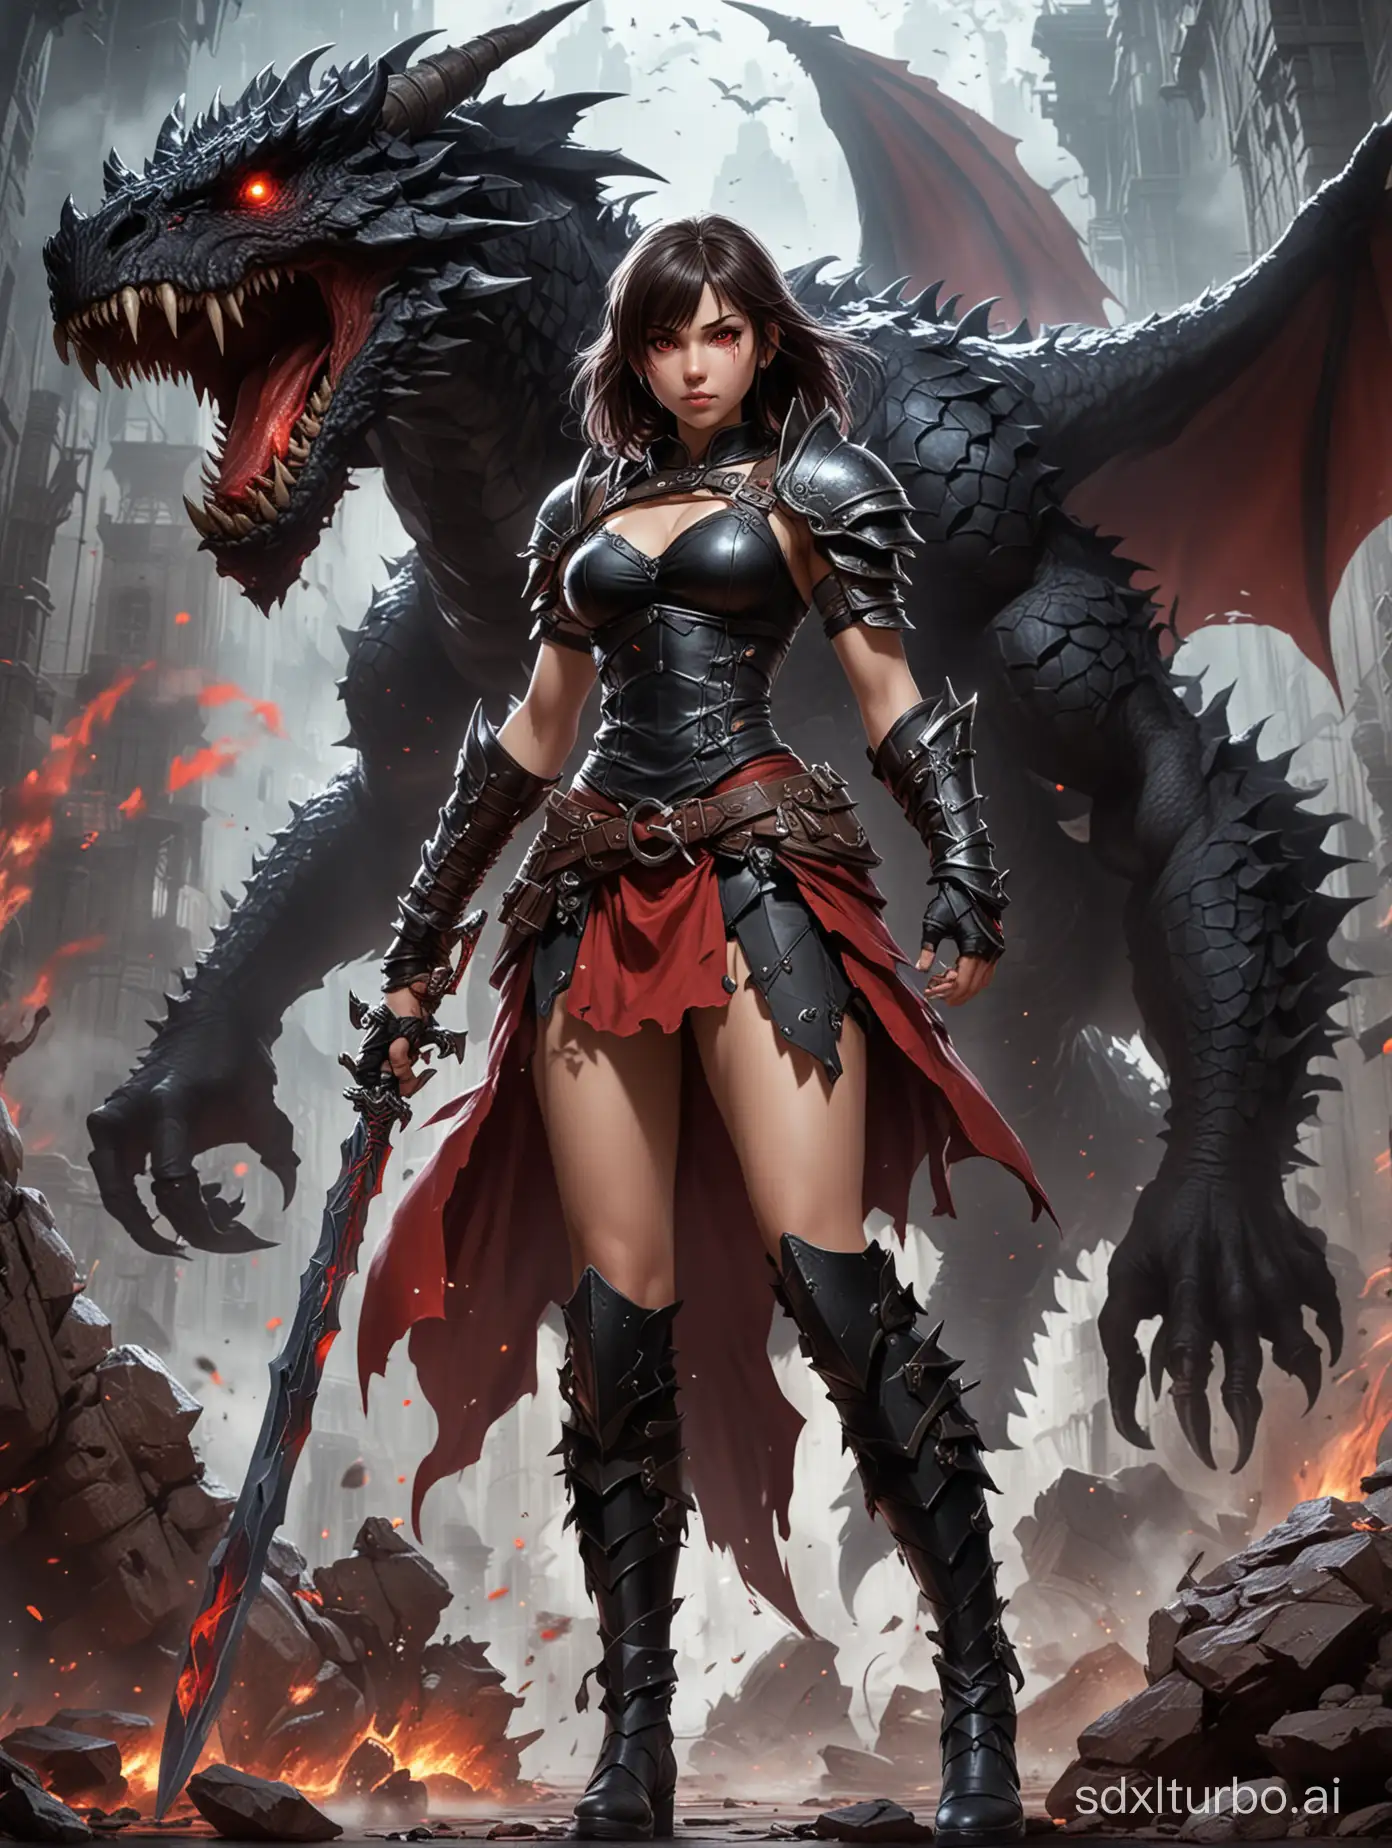 1. Dynamic Clash: Anime Girl vs. Evil Black Dragonborn Barbarian" - Action movie style poster featuring a rendered anime girl in skirt and boots, full body, dynamic, alongside a Dungeons and Dragons 5th Edition Evil Black Dragonborn Barbarian, with bright red eyes and ethereal spirits.